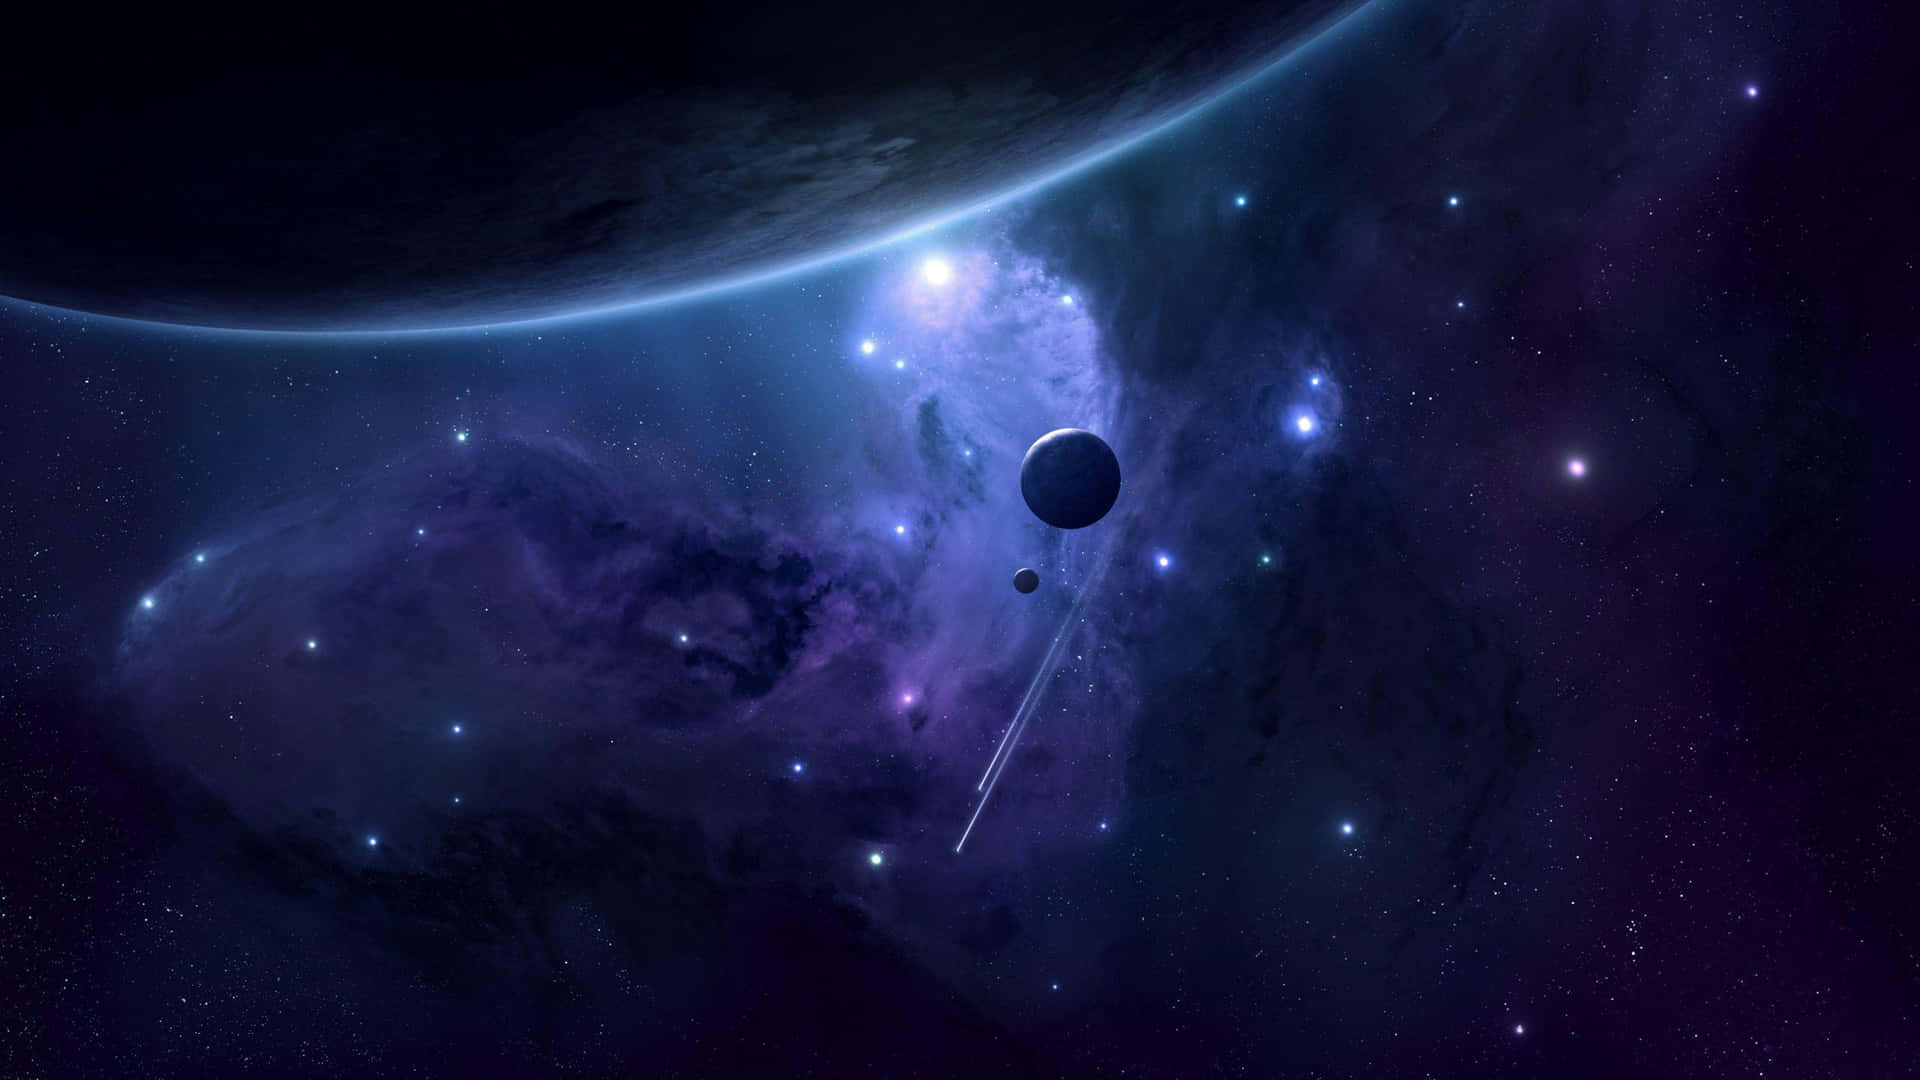 Stunning Celestial Bodies in the Night Sky Wallpaper